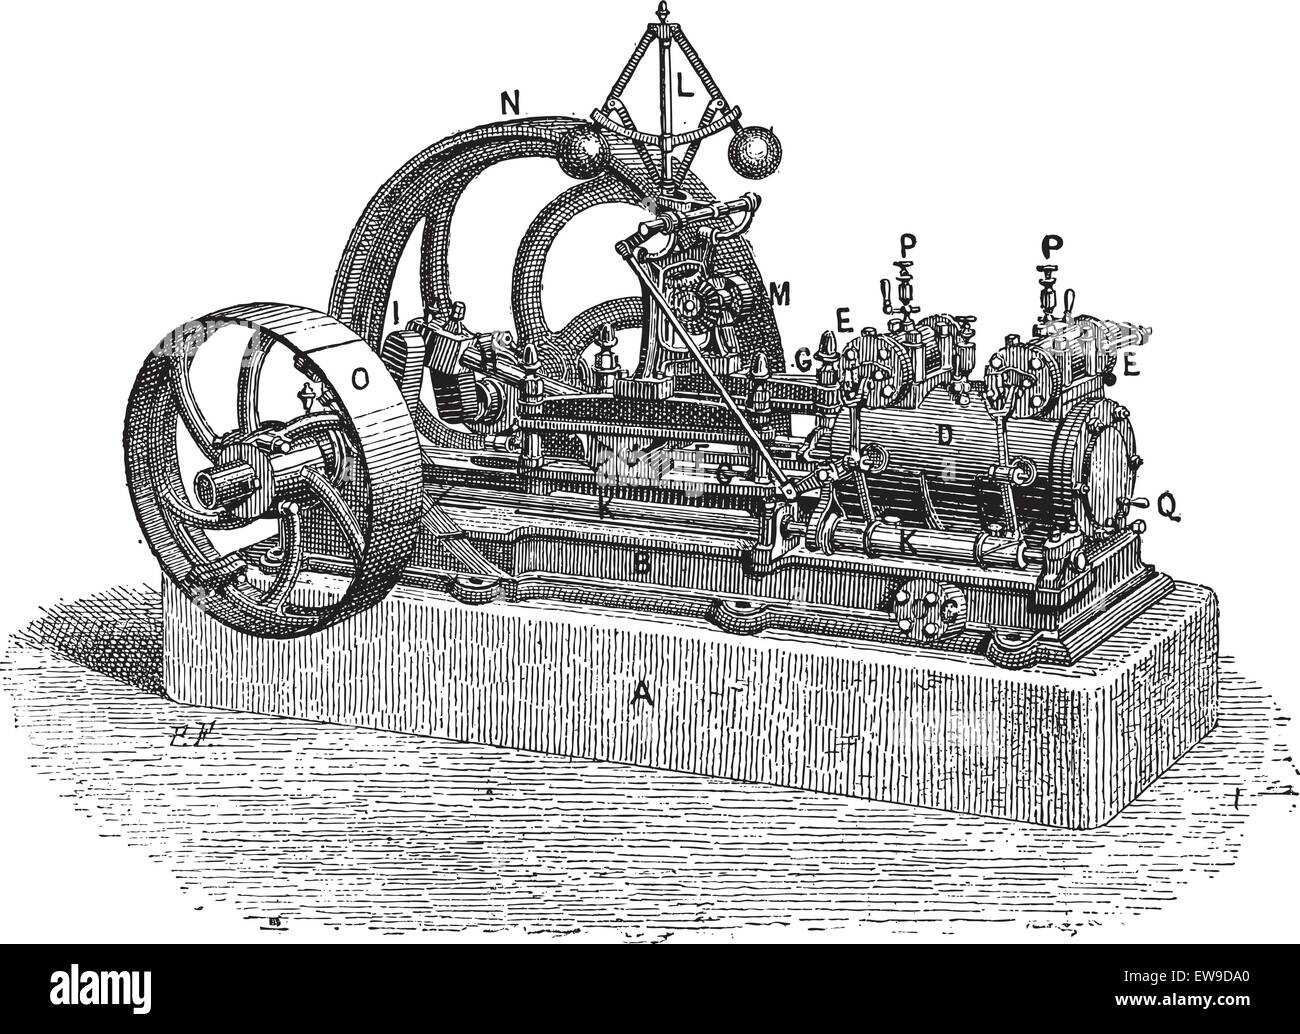 Horizontal Steam Engine, vintage engraved illustration. Dictionary of Words and Things - Larive and Fleury - 1895 Stock Vector